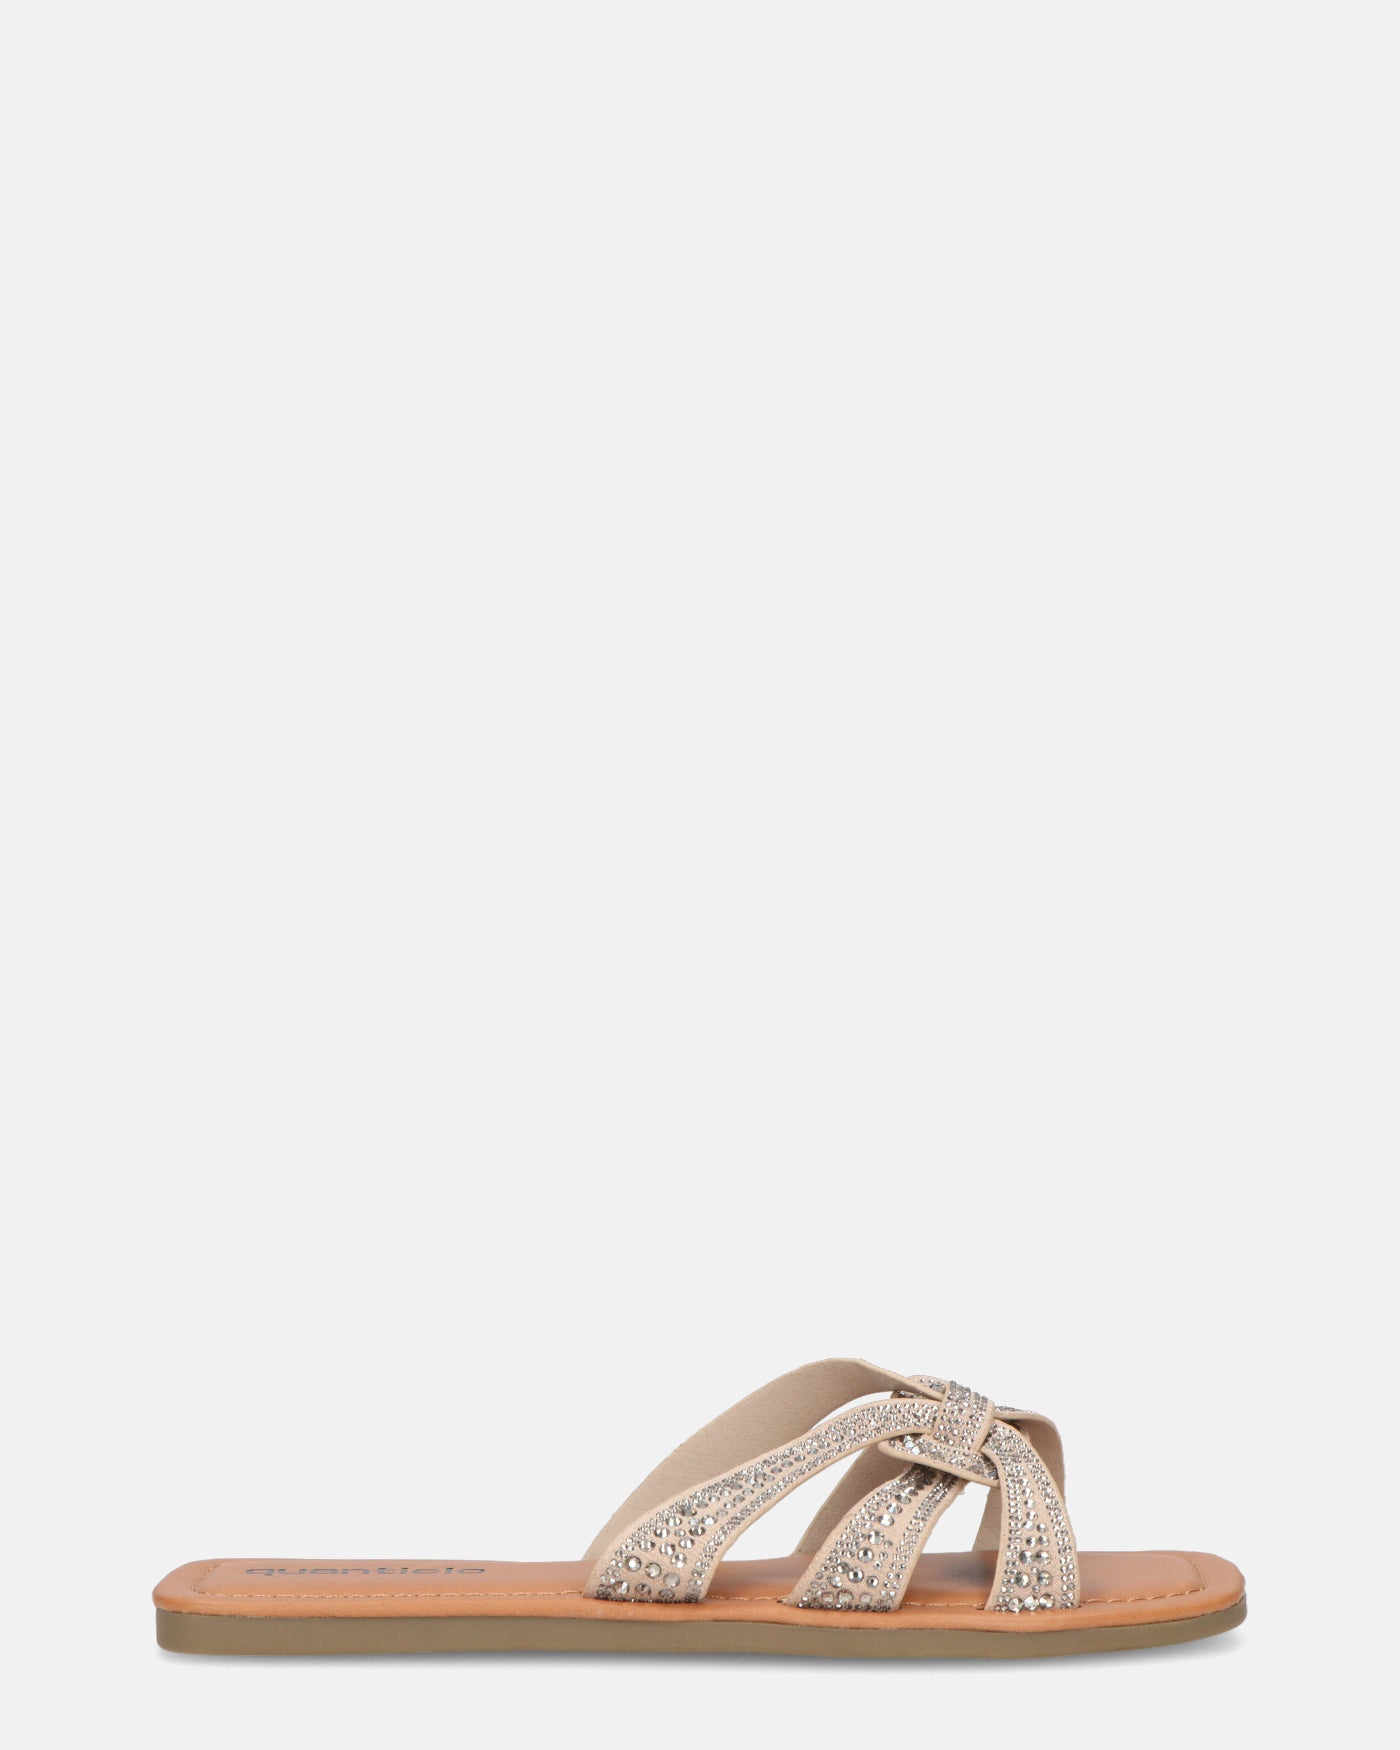 NURY - flat sandals with beige stripes and gems